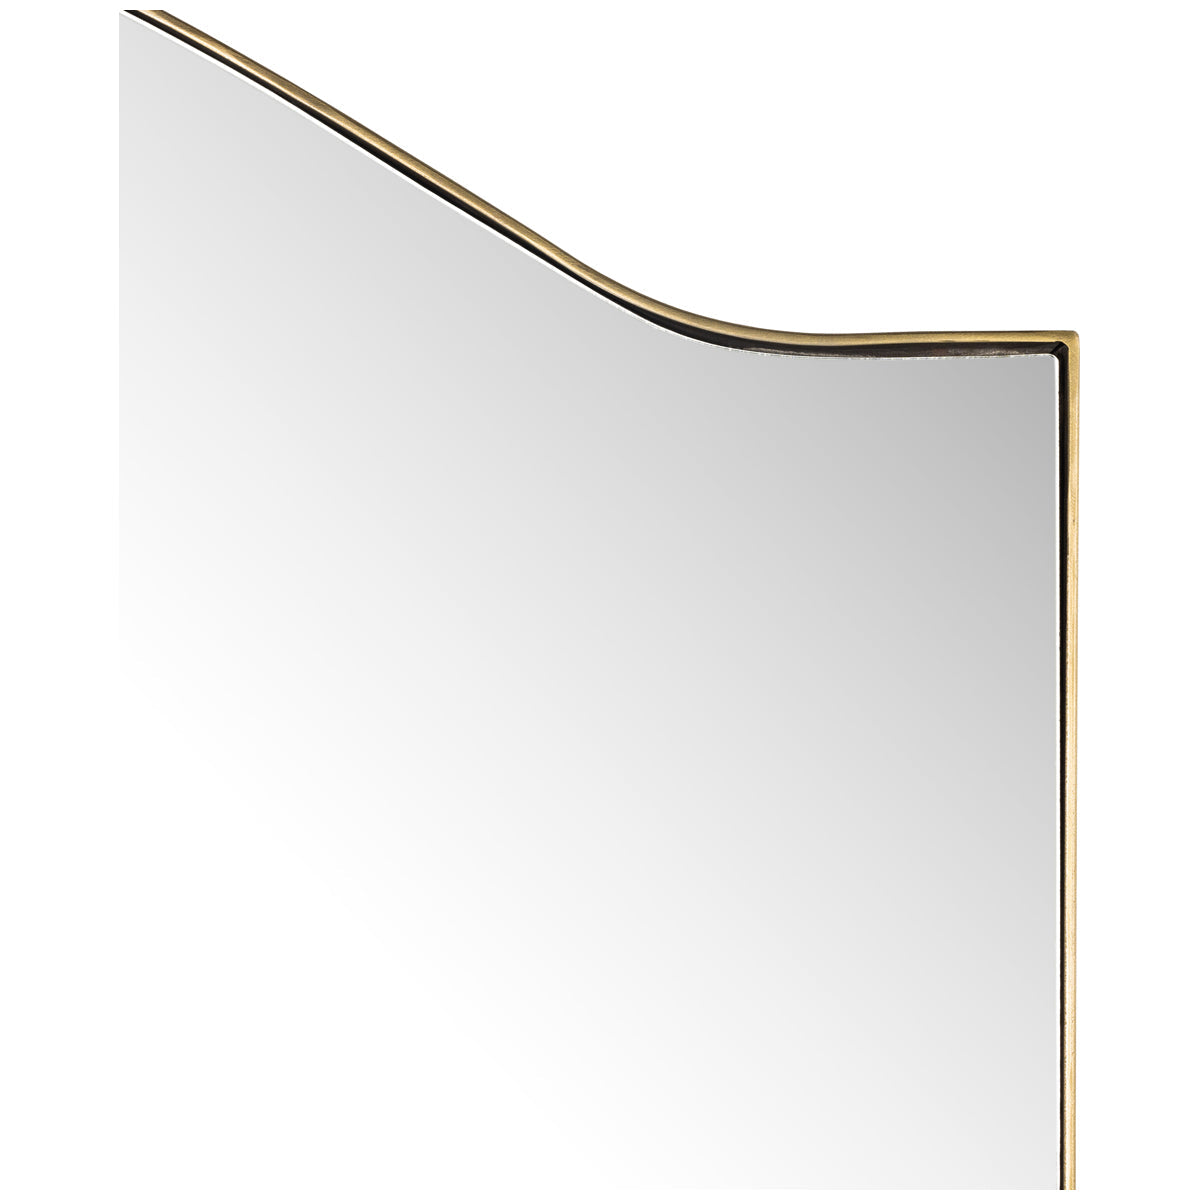 Four Hands Asher Jacques Floor Mirror - Antique Brass